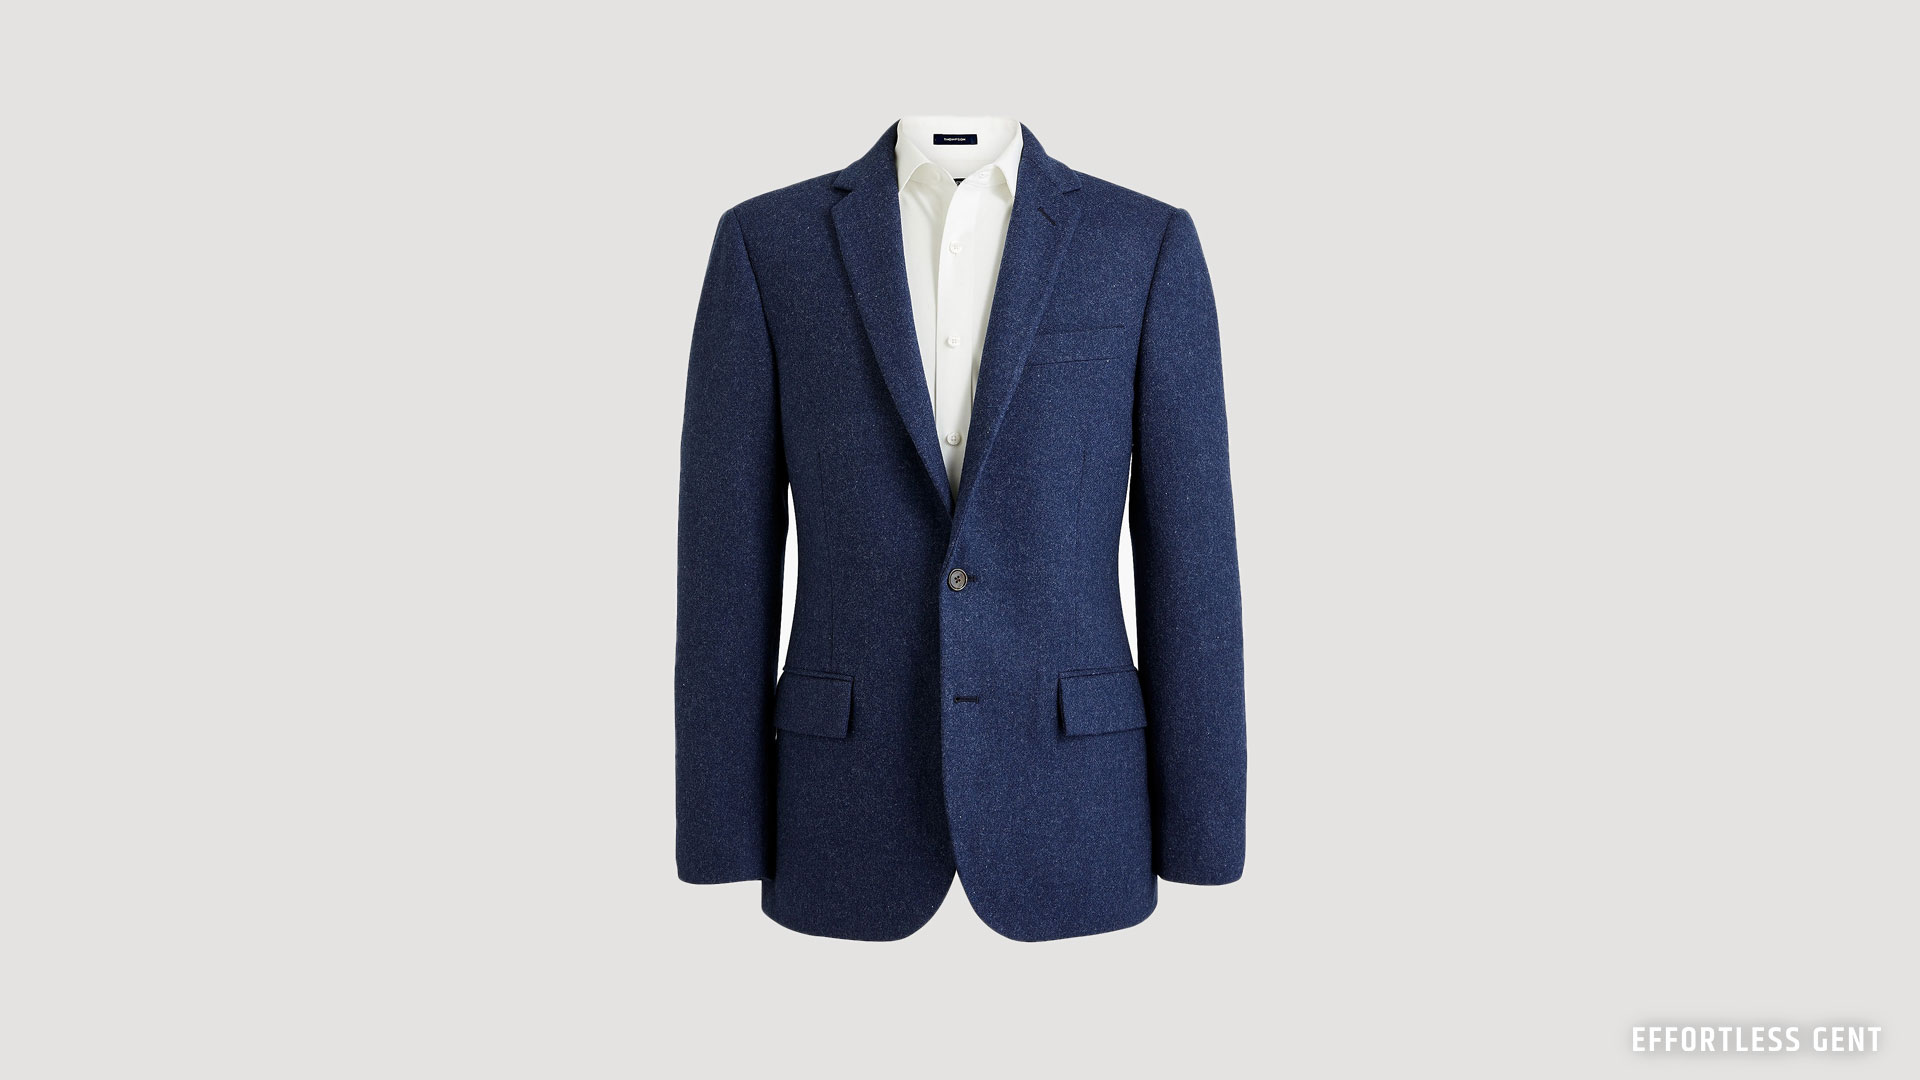 J.Crew Thompson sport coat is perfect for the budget lean wardrobe